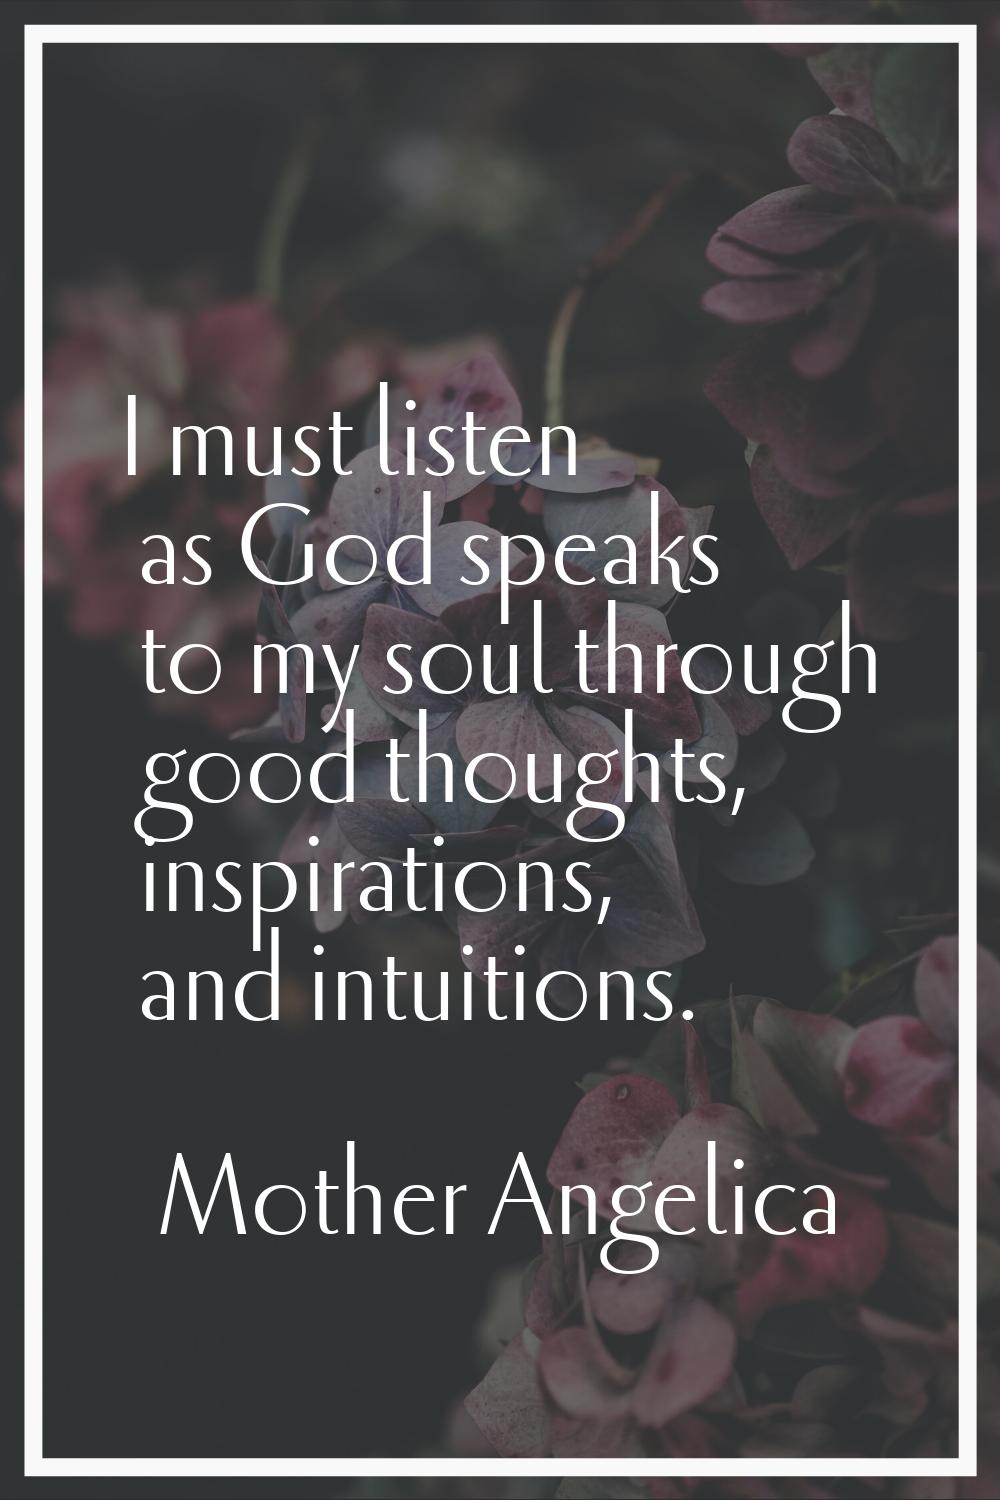 I must listen as God speaks to my soul through good thoughts, inspirations, and intuitions.